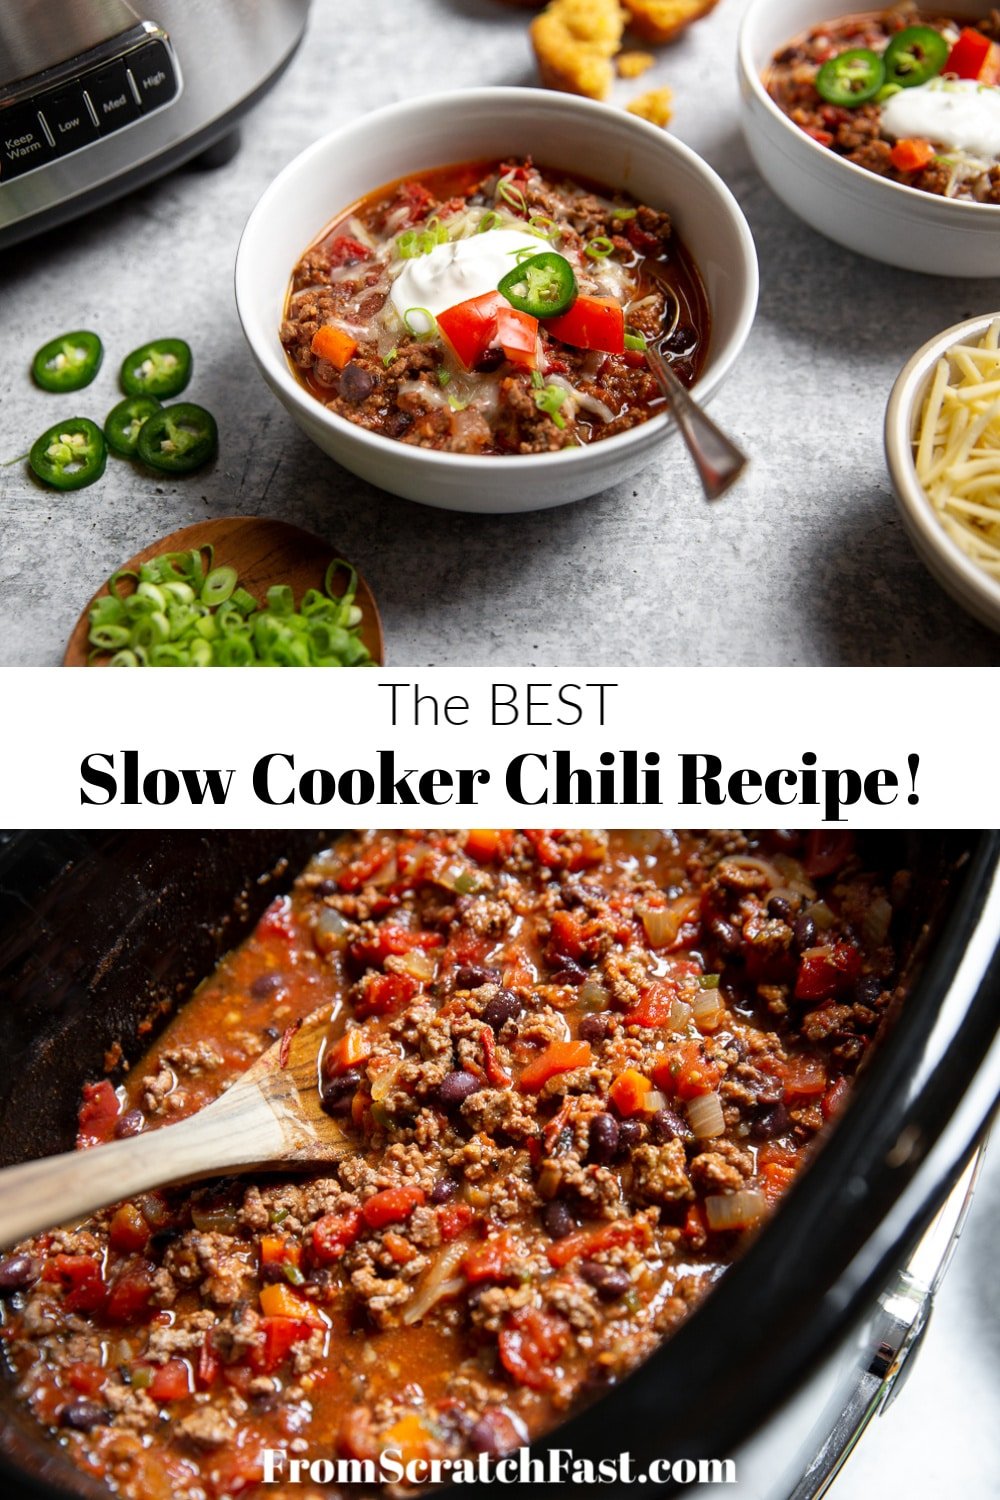 The BEST Slow Cooker Beef Chili - From Scratch Fast